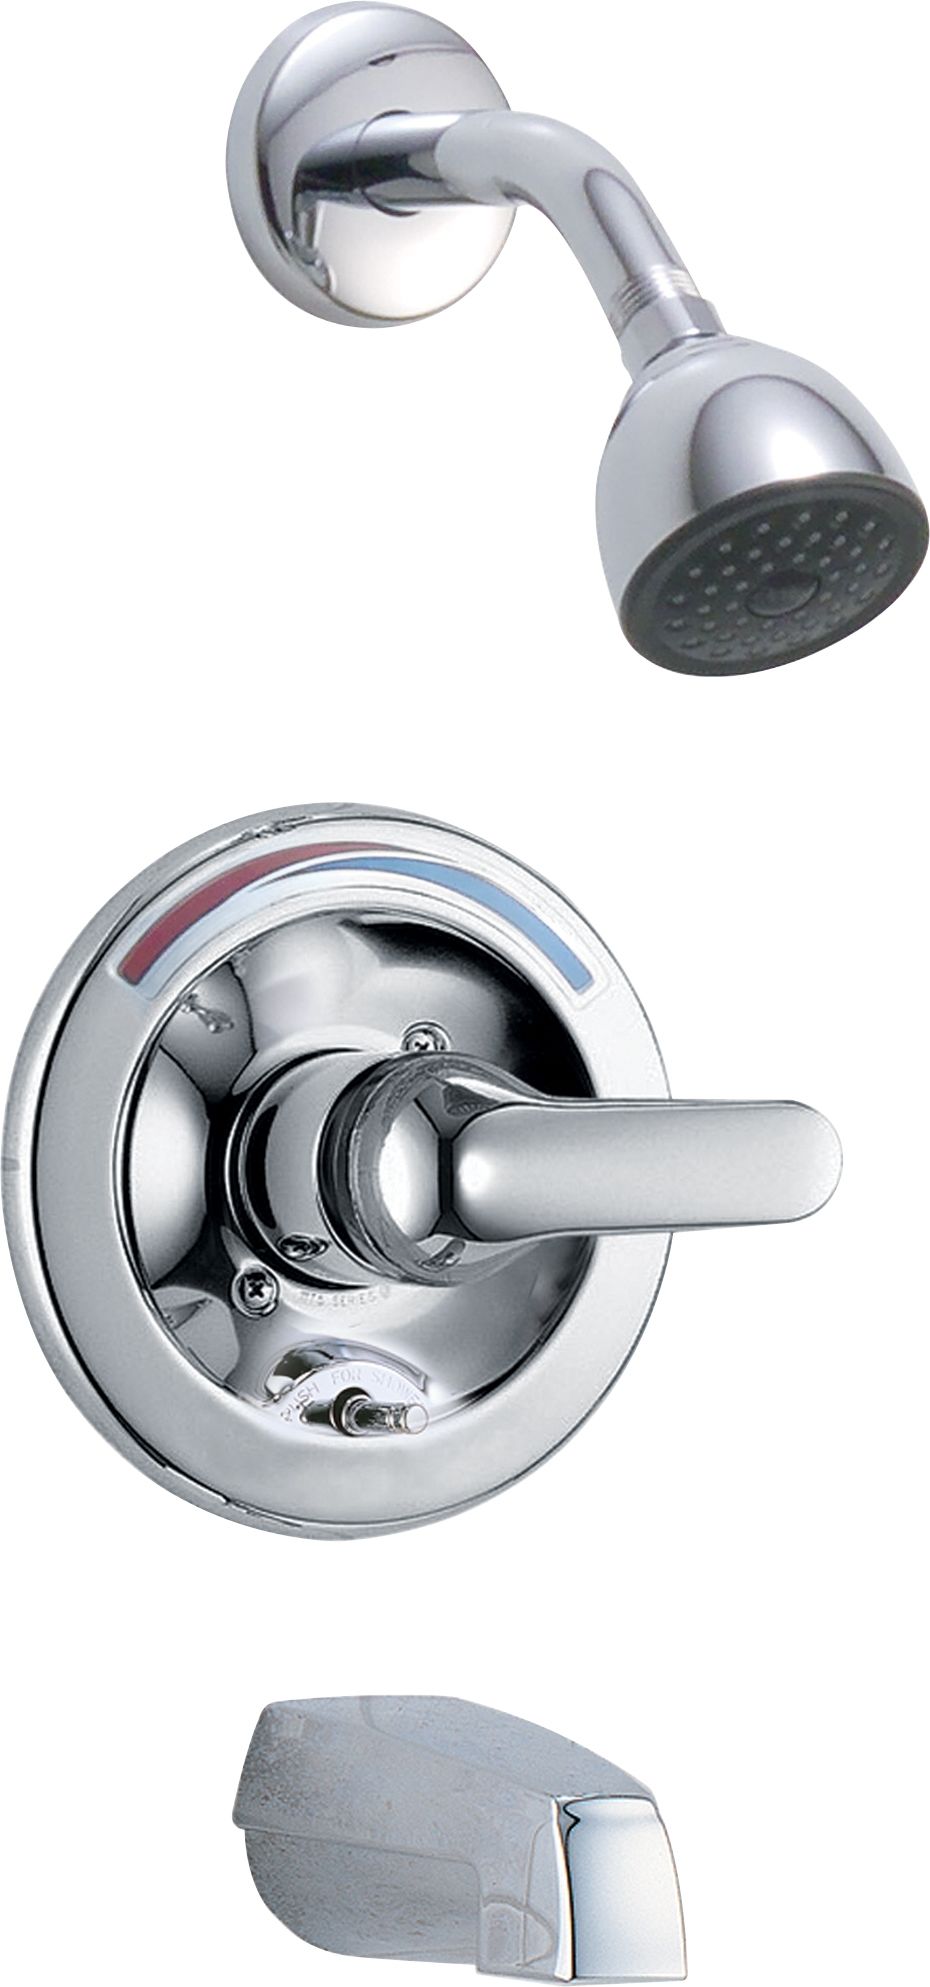 Delta T13691 Chrome Commercial Single Handle Tub And Shower Valve Trim With Push Button Diverter And Metal Lever Handle Faucetdirect Com